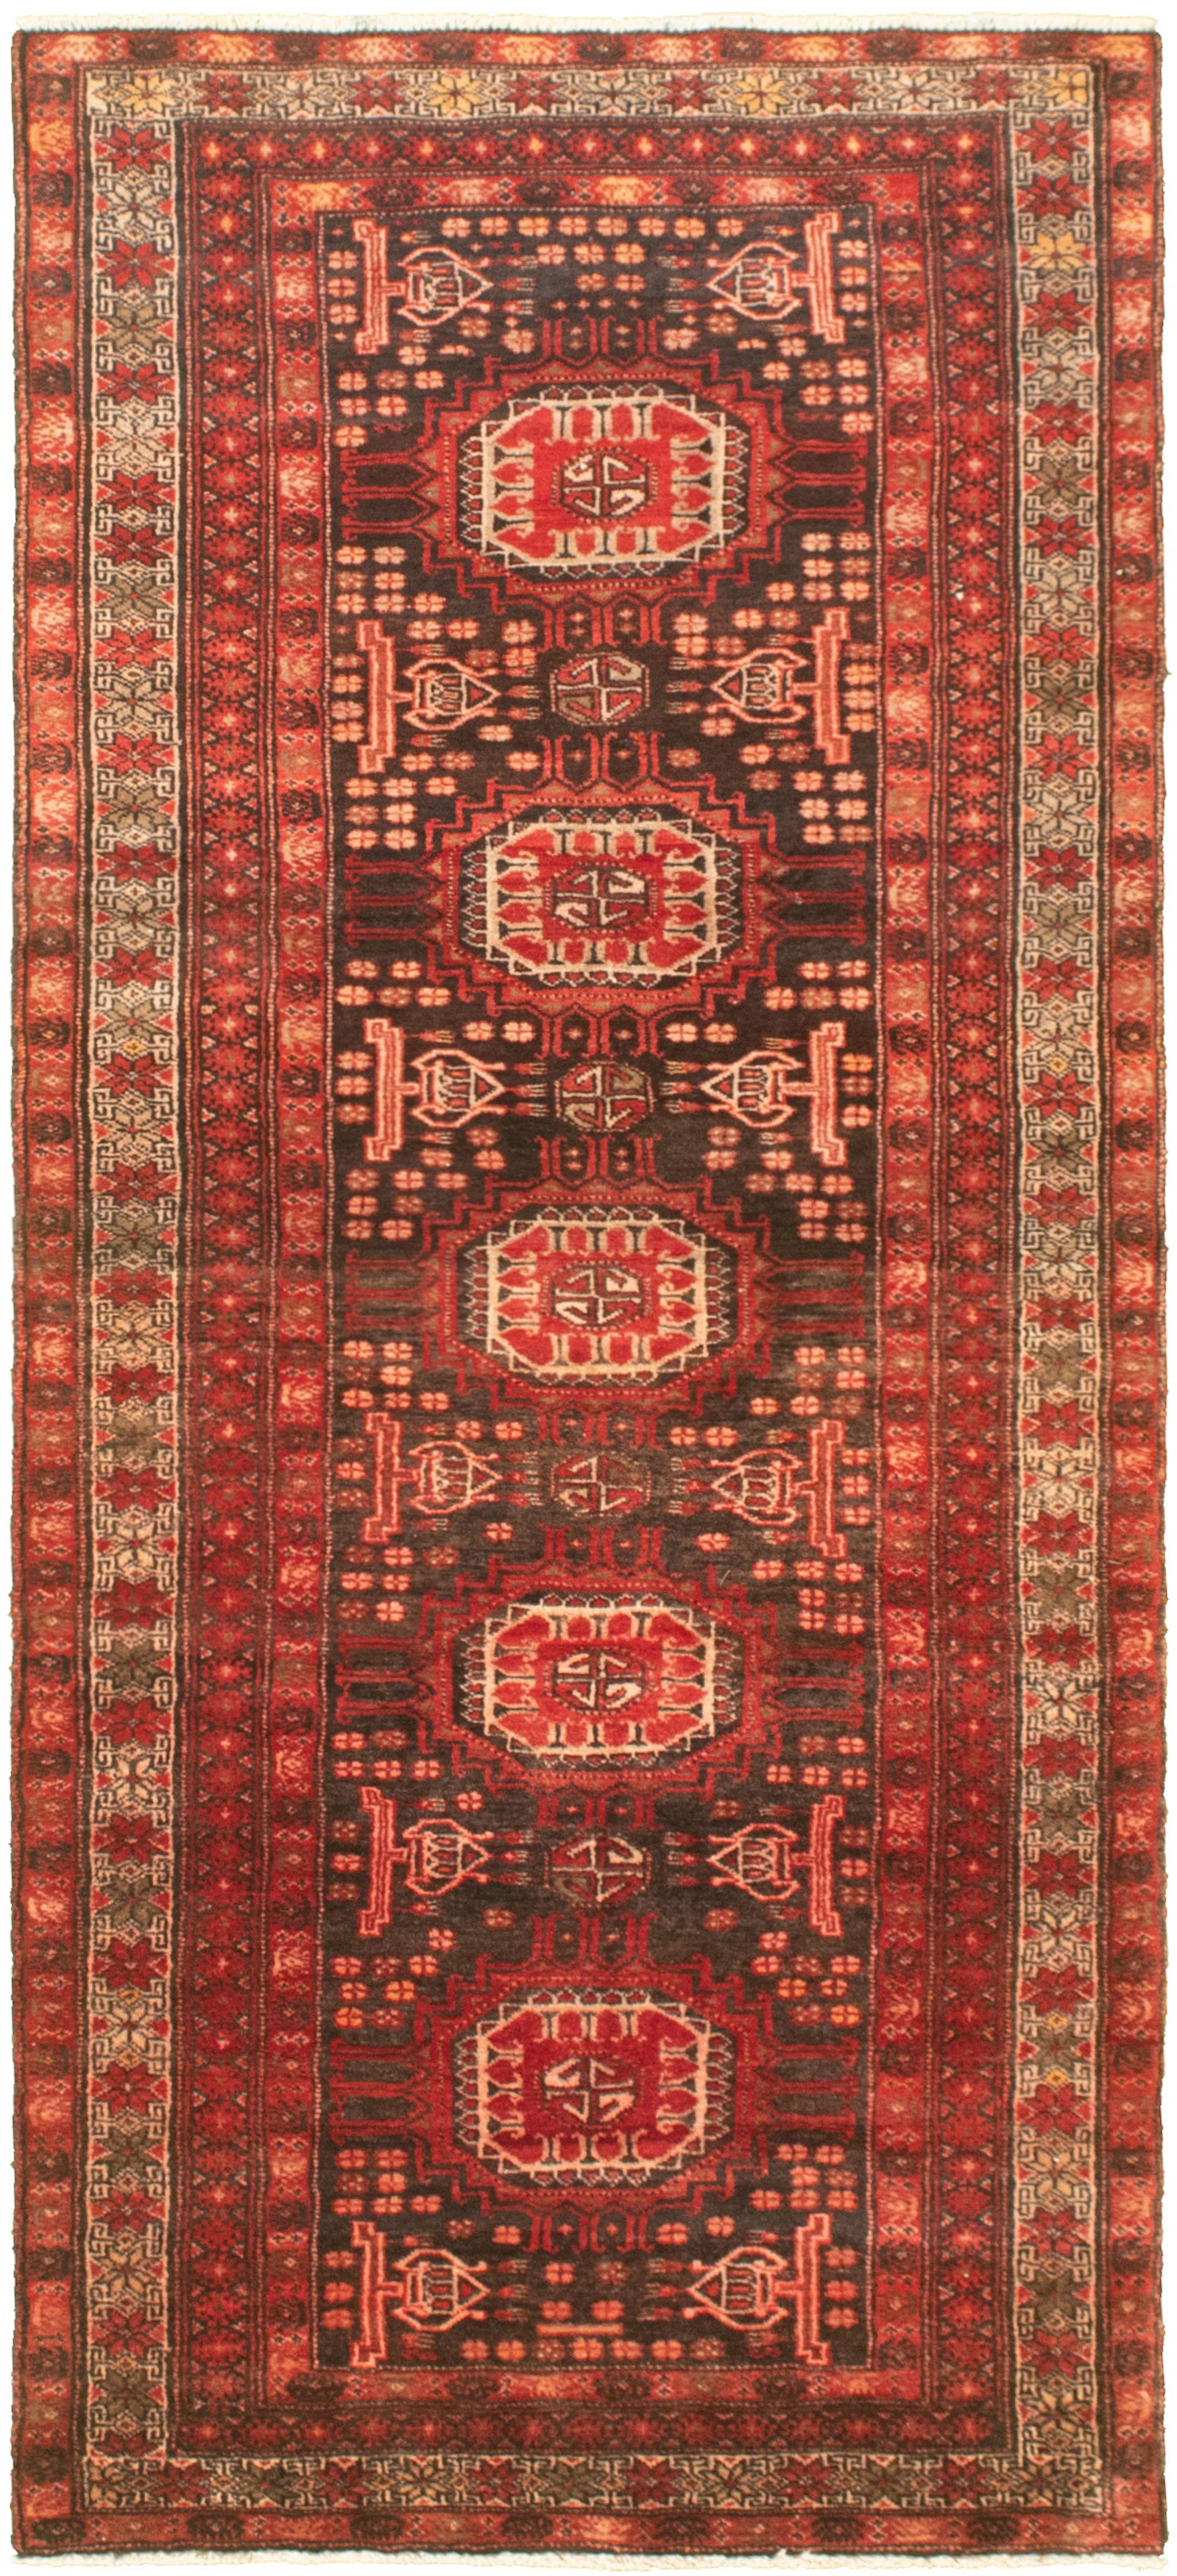 Hand-knotted Authentic Turkish Red Wool Rug 2'11" x 7'3" Size: 2'11" x 7'3"  